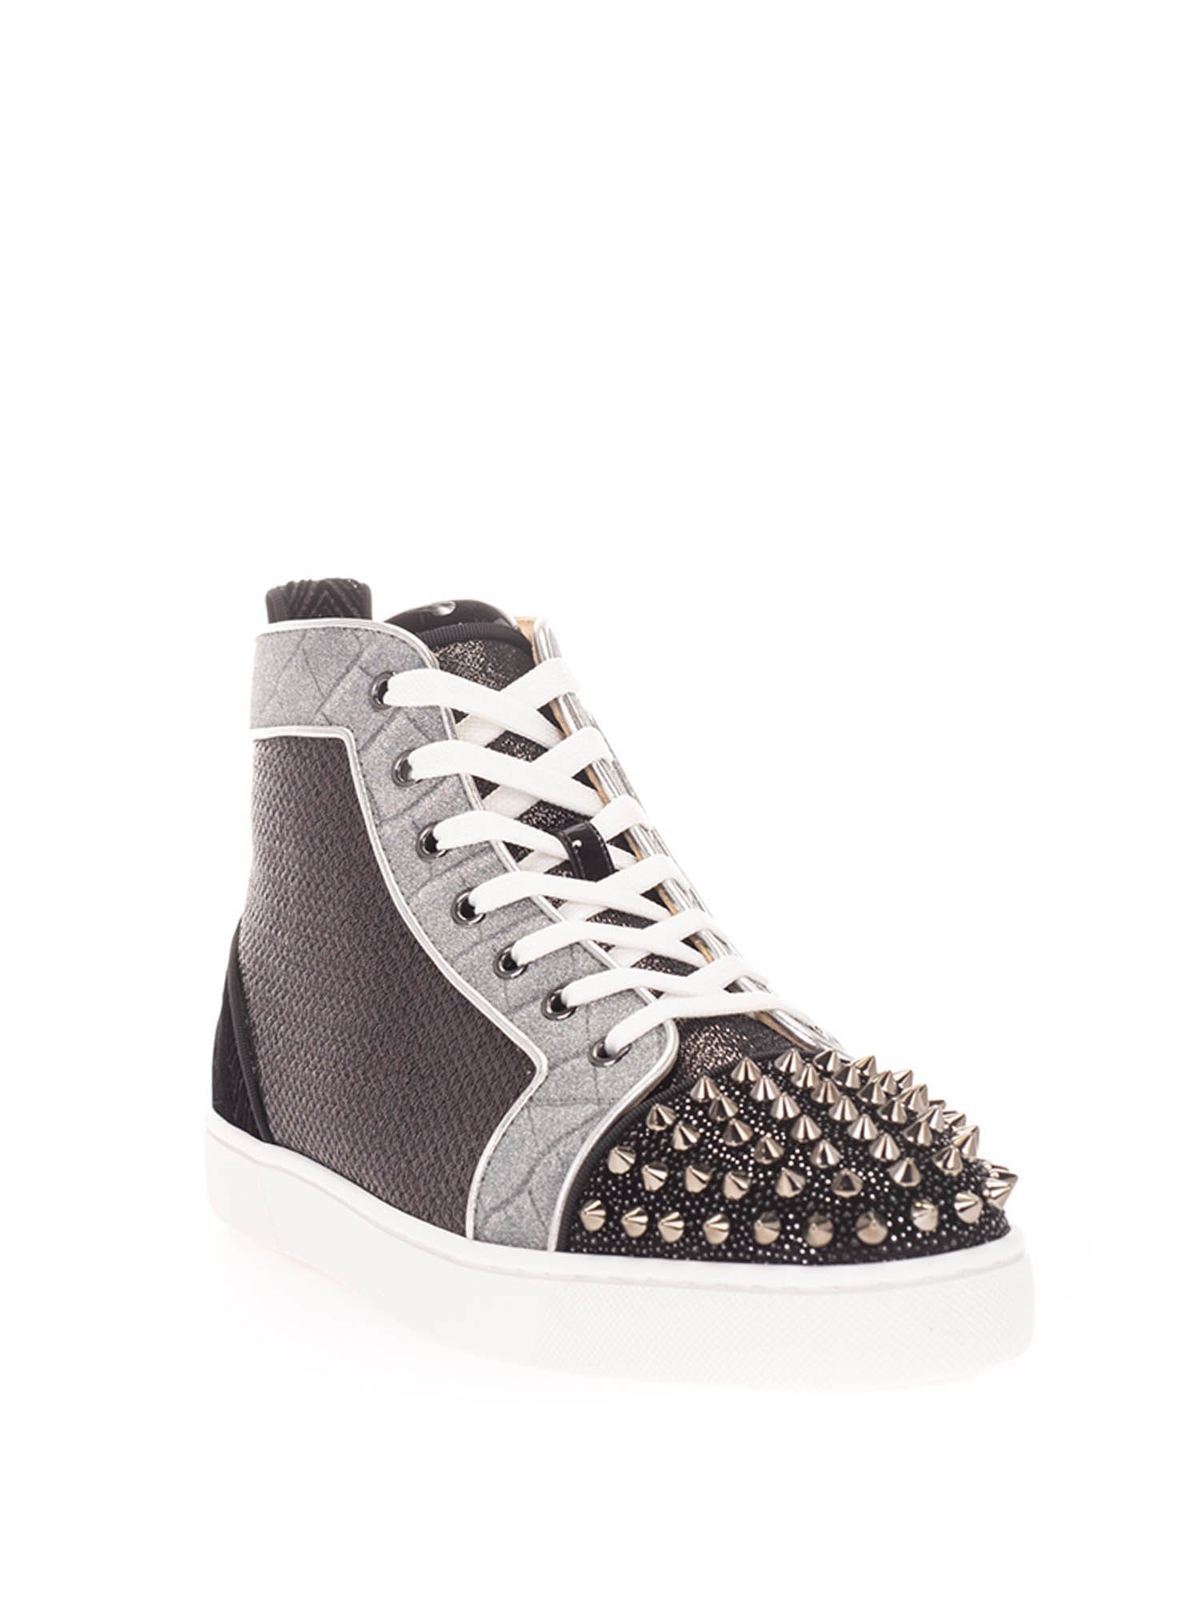 Christian Louboutin Lou Spikes Orlato Leather Sneaker in Black for